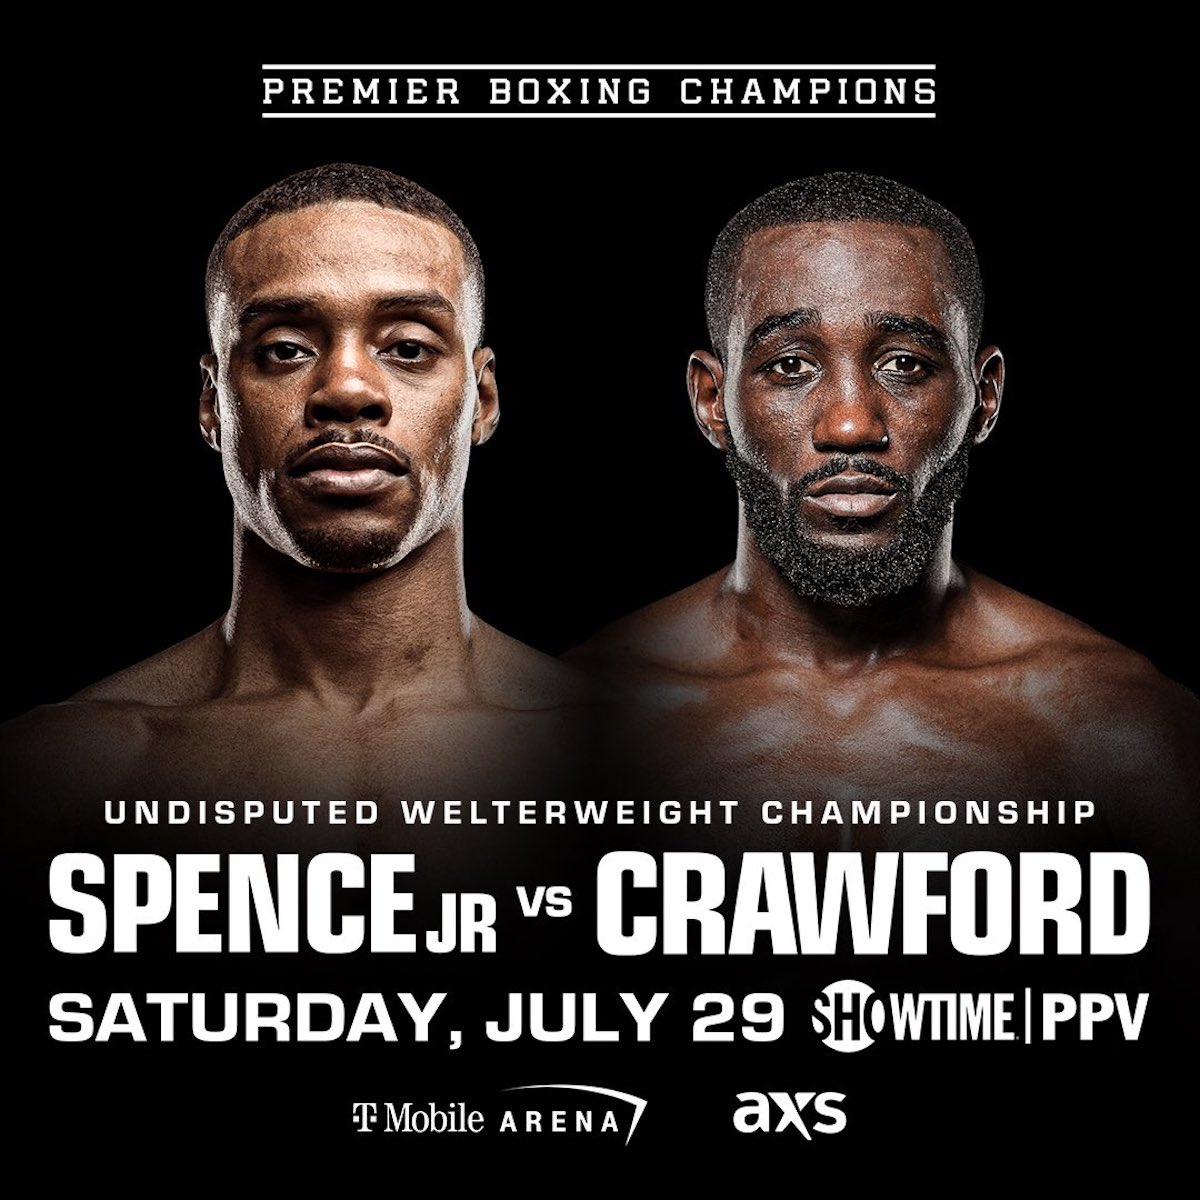 Errol Spence Jr. vs. Terence Crawford A Look at the Numbers